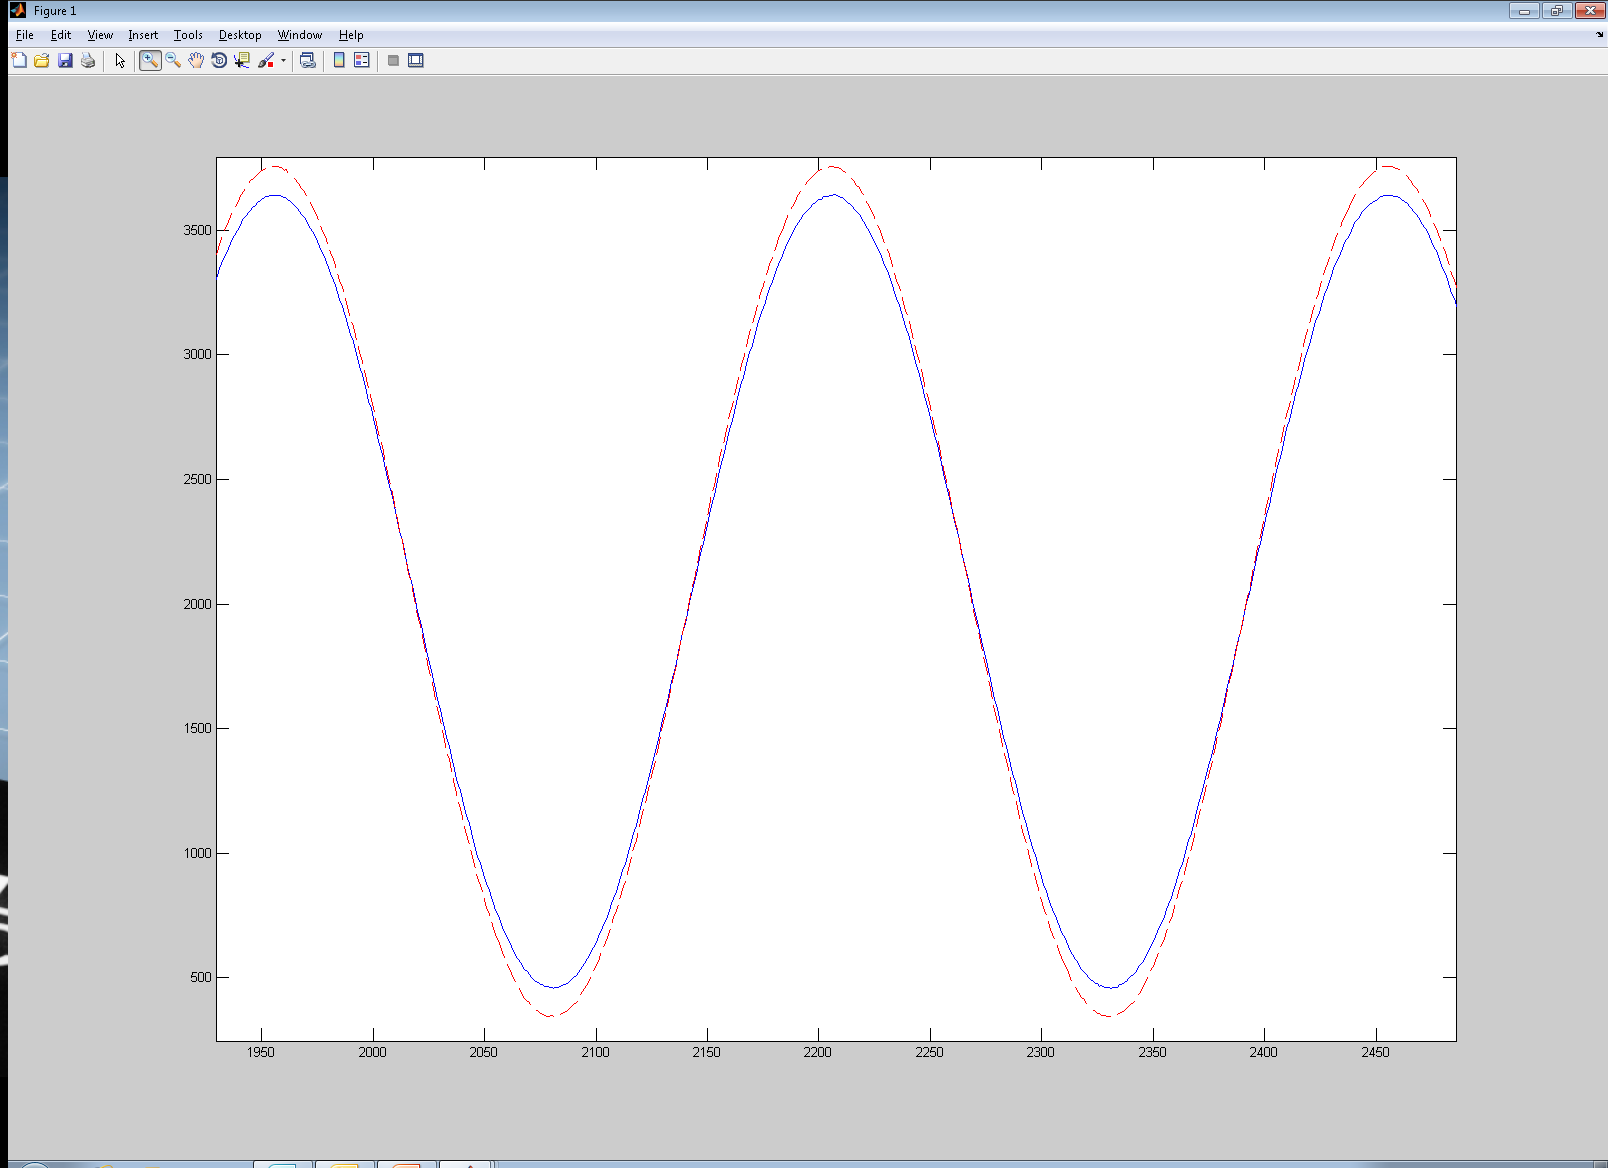 Figure 3 - Matlab reconstruction of raw data in the time domain